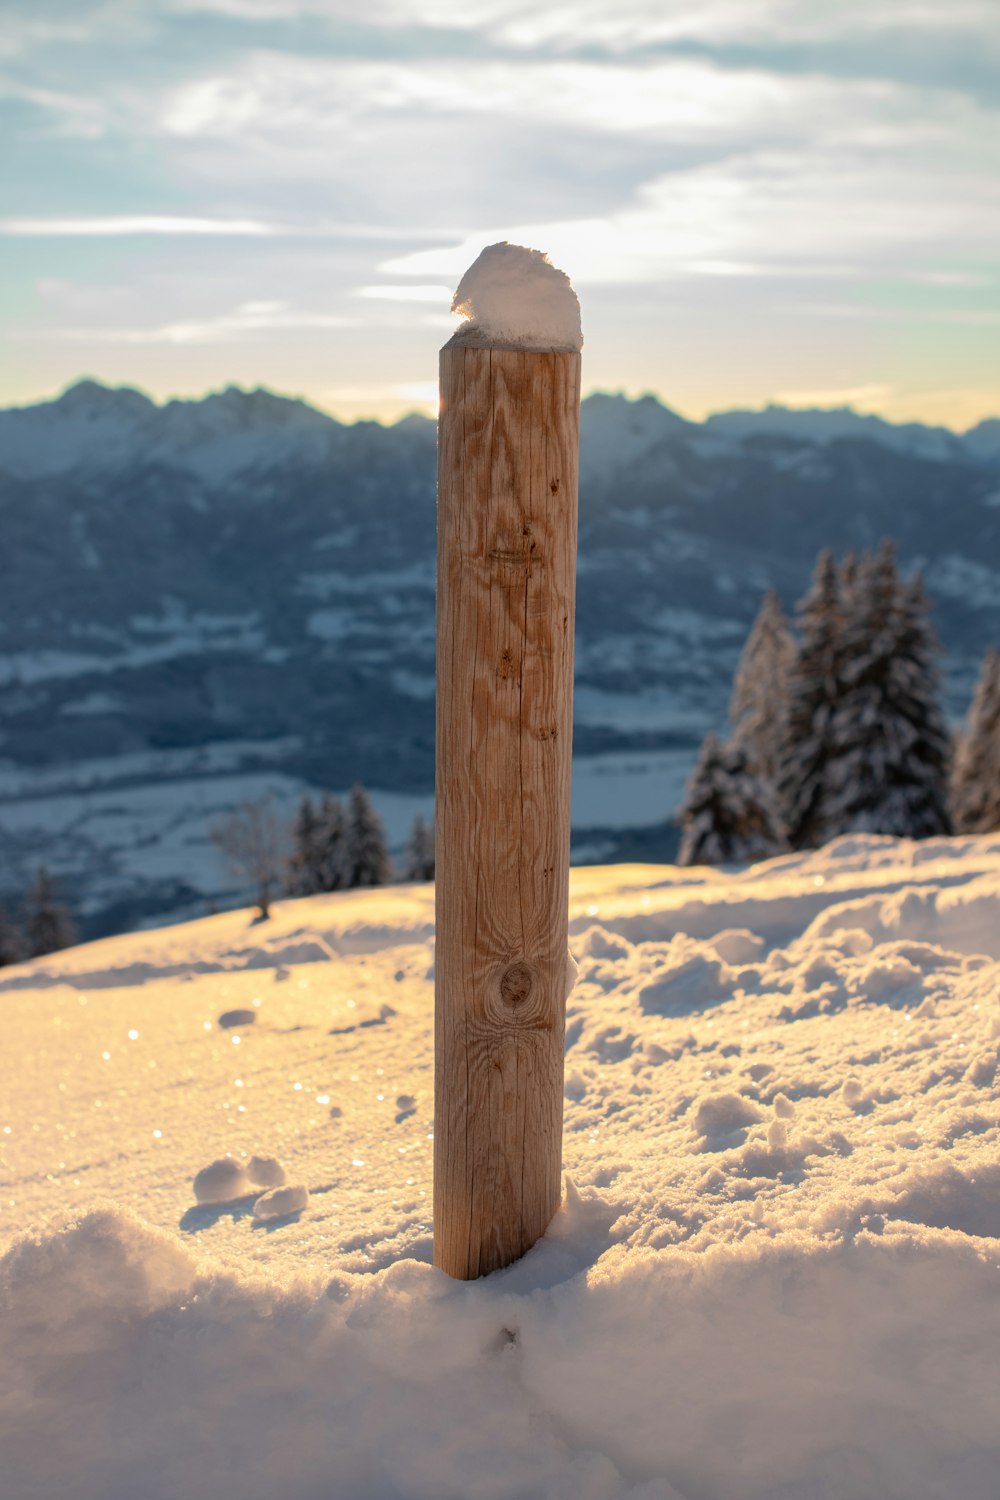 a wooden post in the snow with mountains in the background